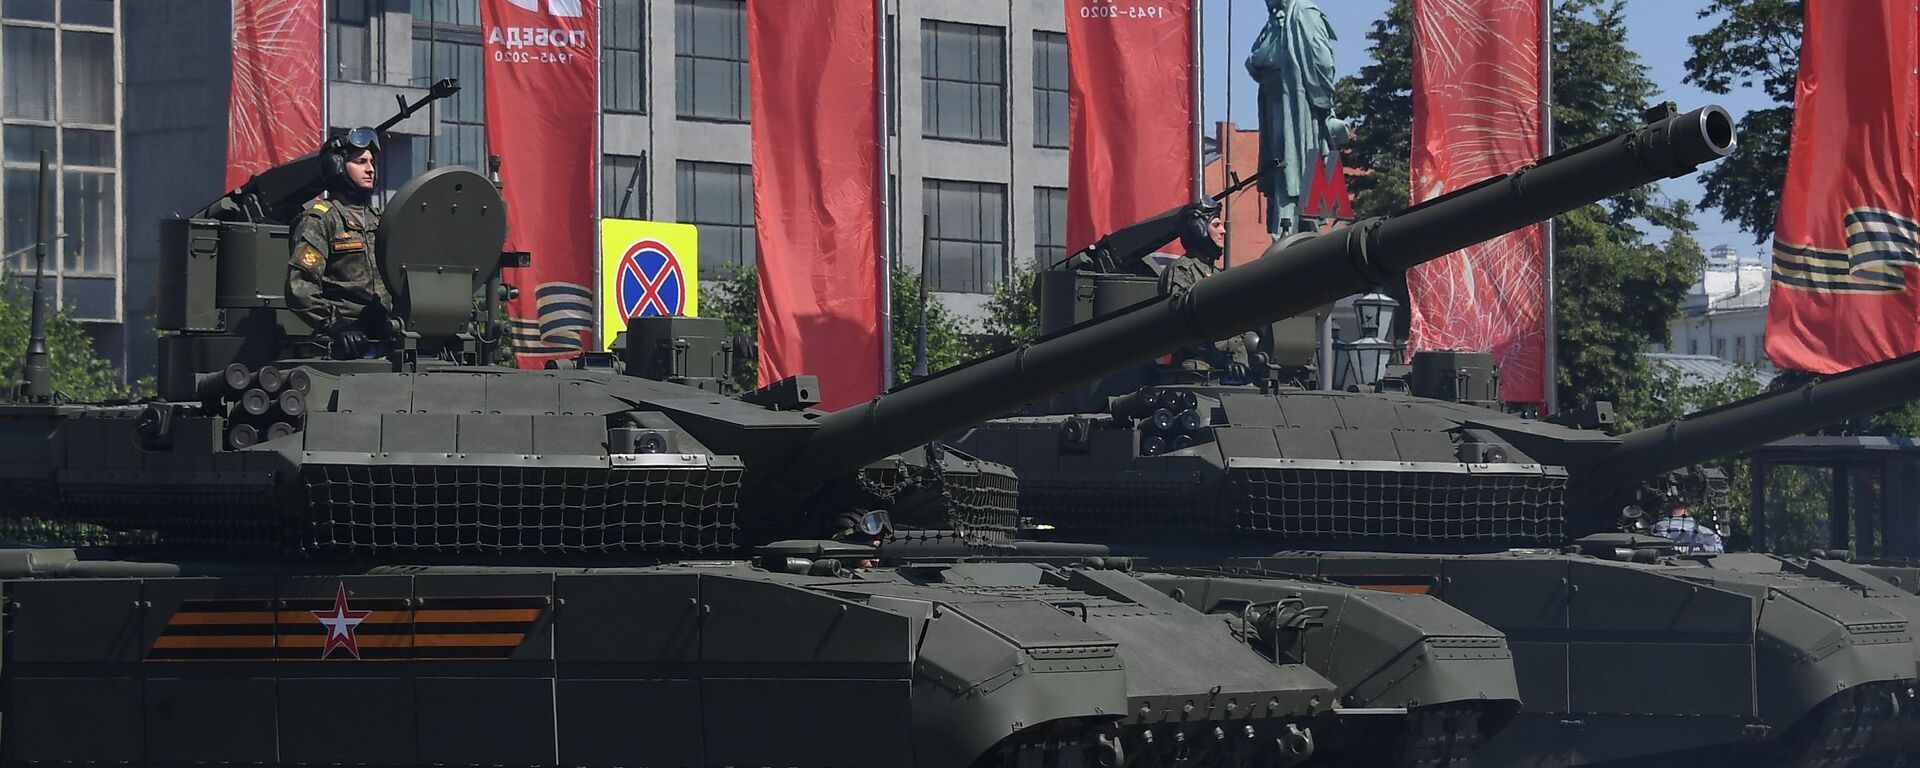 T-90M Proryv ('Breakthrough') tanks at the June 24, 2020 parade in Moscow. - Sputnik International, 1920, 23.03.2023